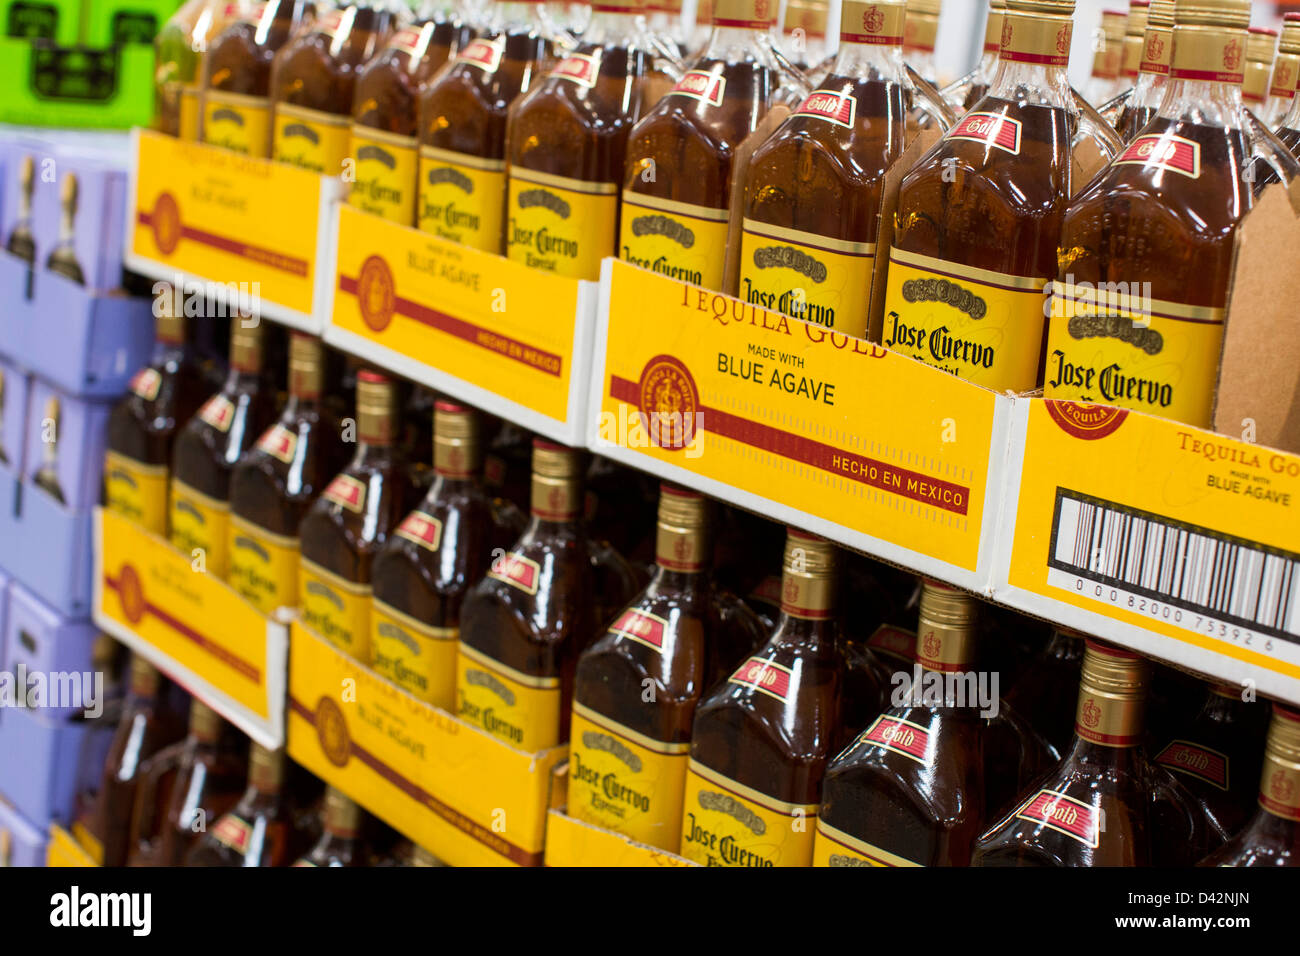 Jose Cuervo tequila on display at a Costco Wholesale Warehouse Club. Stock Photo